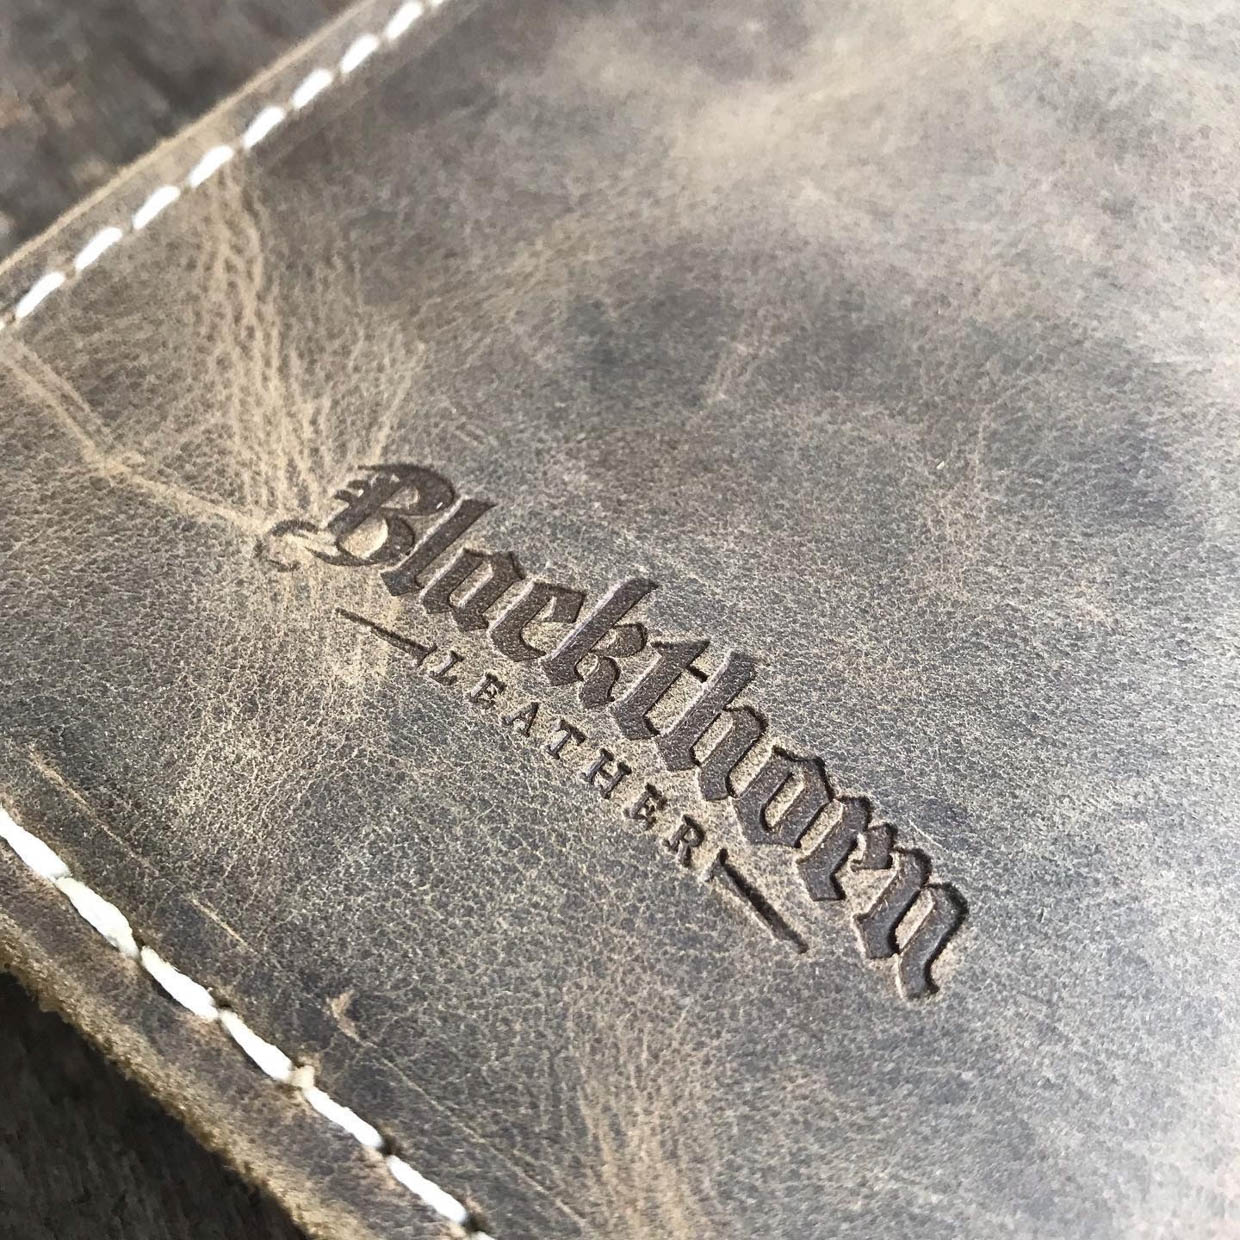 Blackthorn Leather Field Notes Wallet